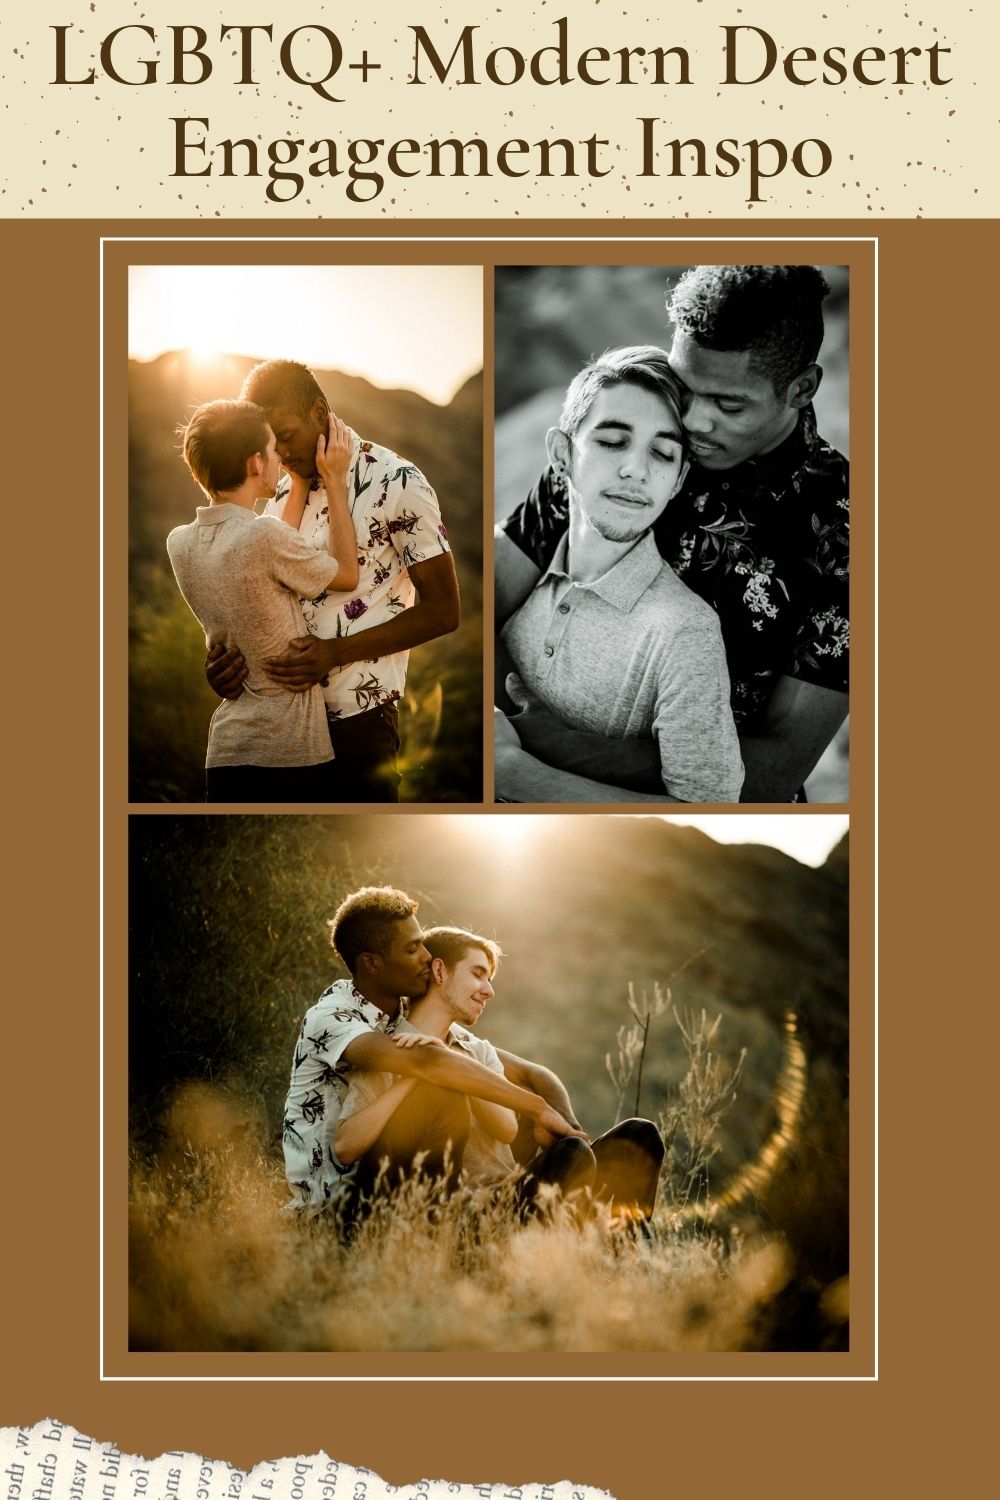 Epic location in the Gold Canyon desert in Arizona for your lgbtq+ engagement session